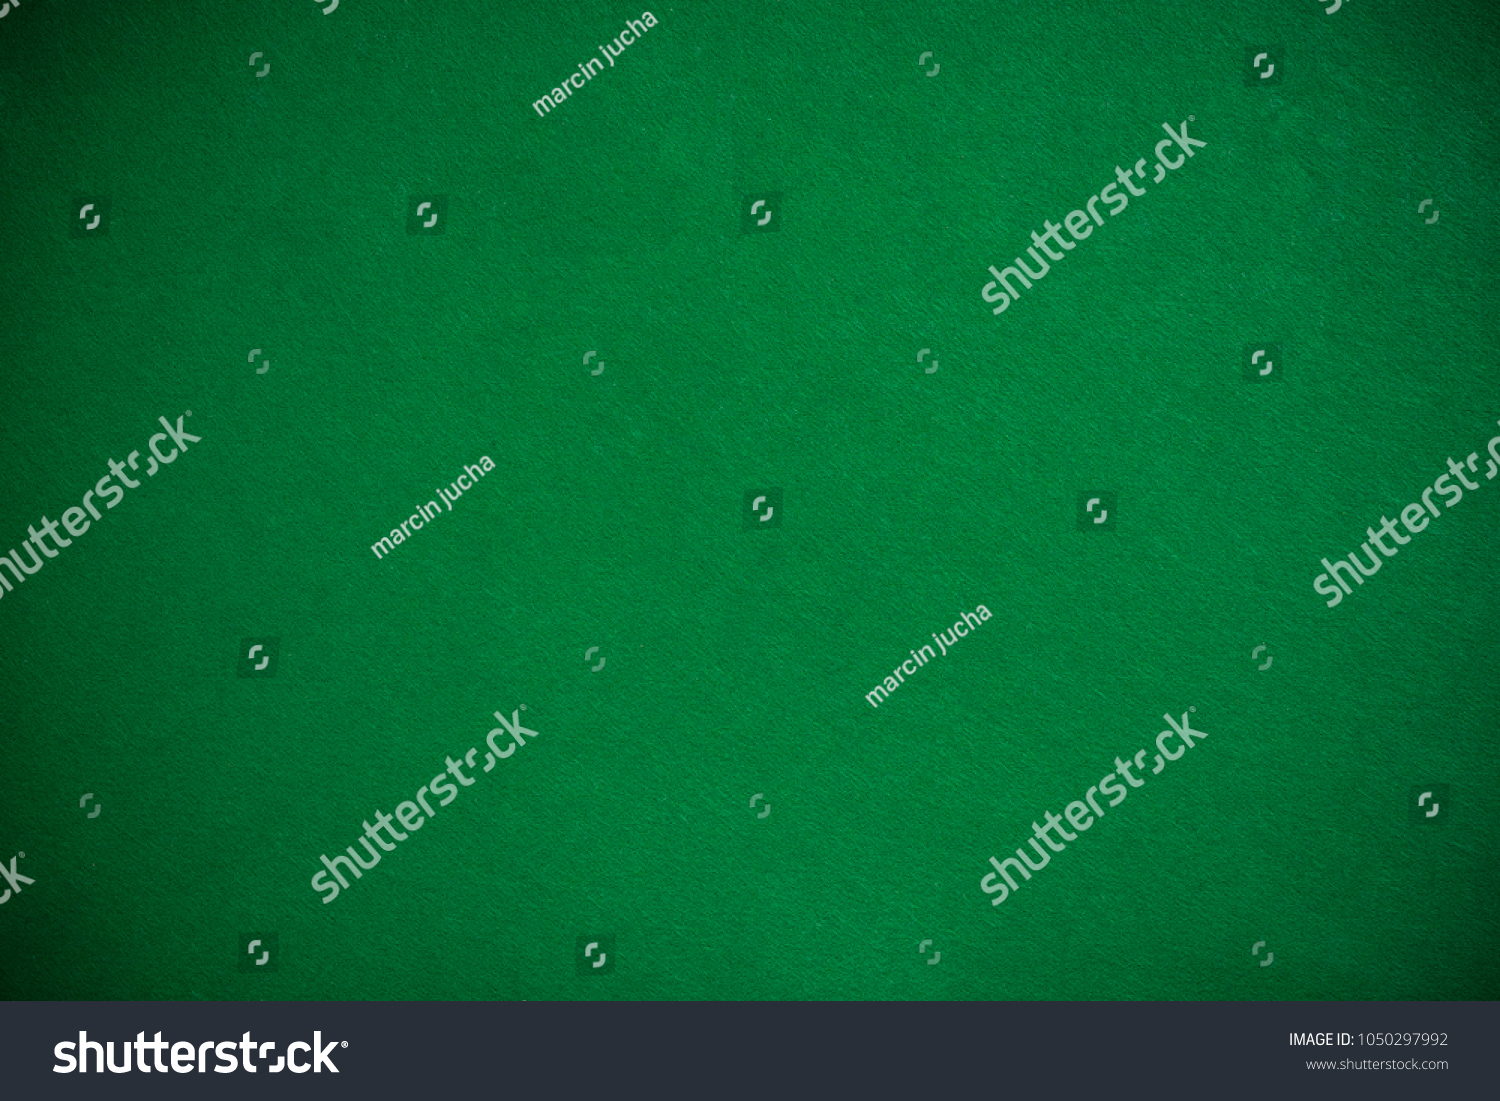 Emty green cloth poker table, template or mock up #1050297992